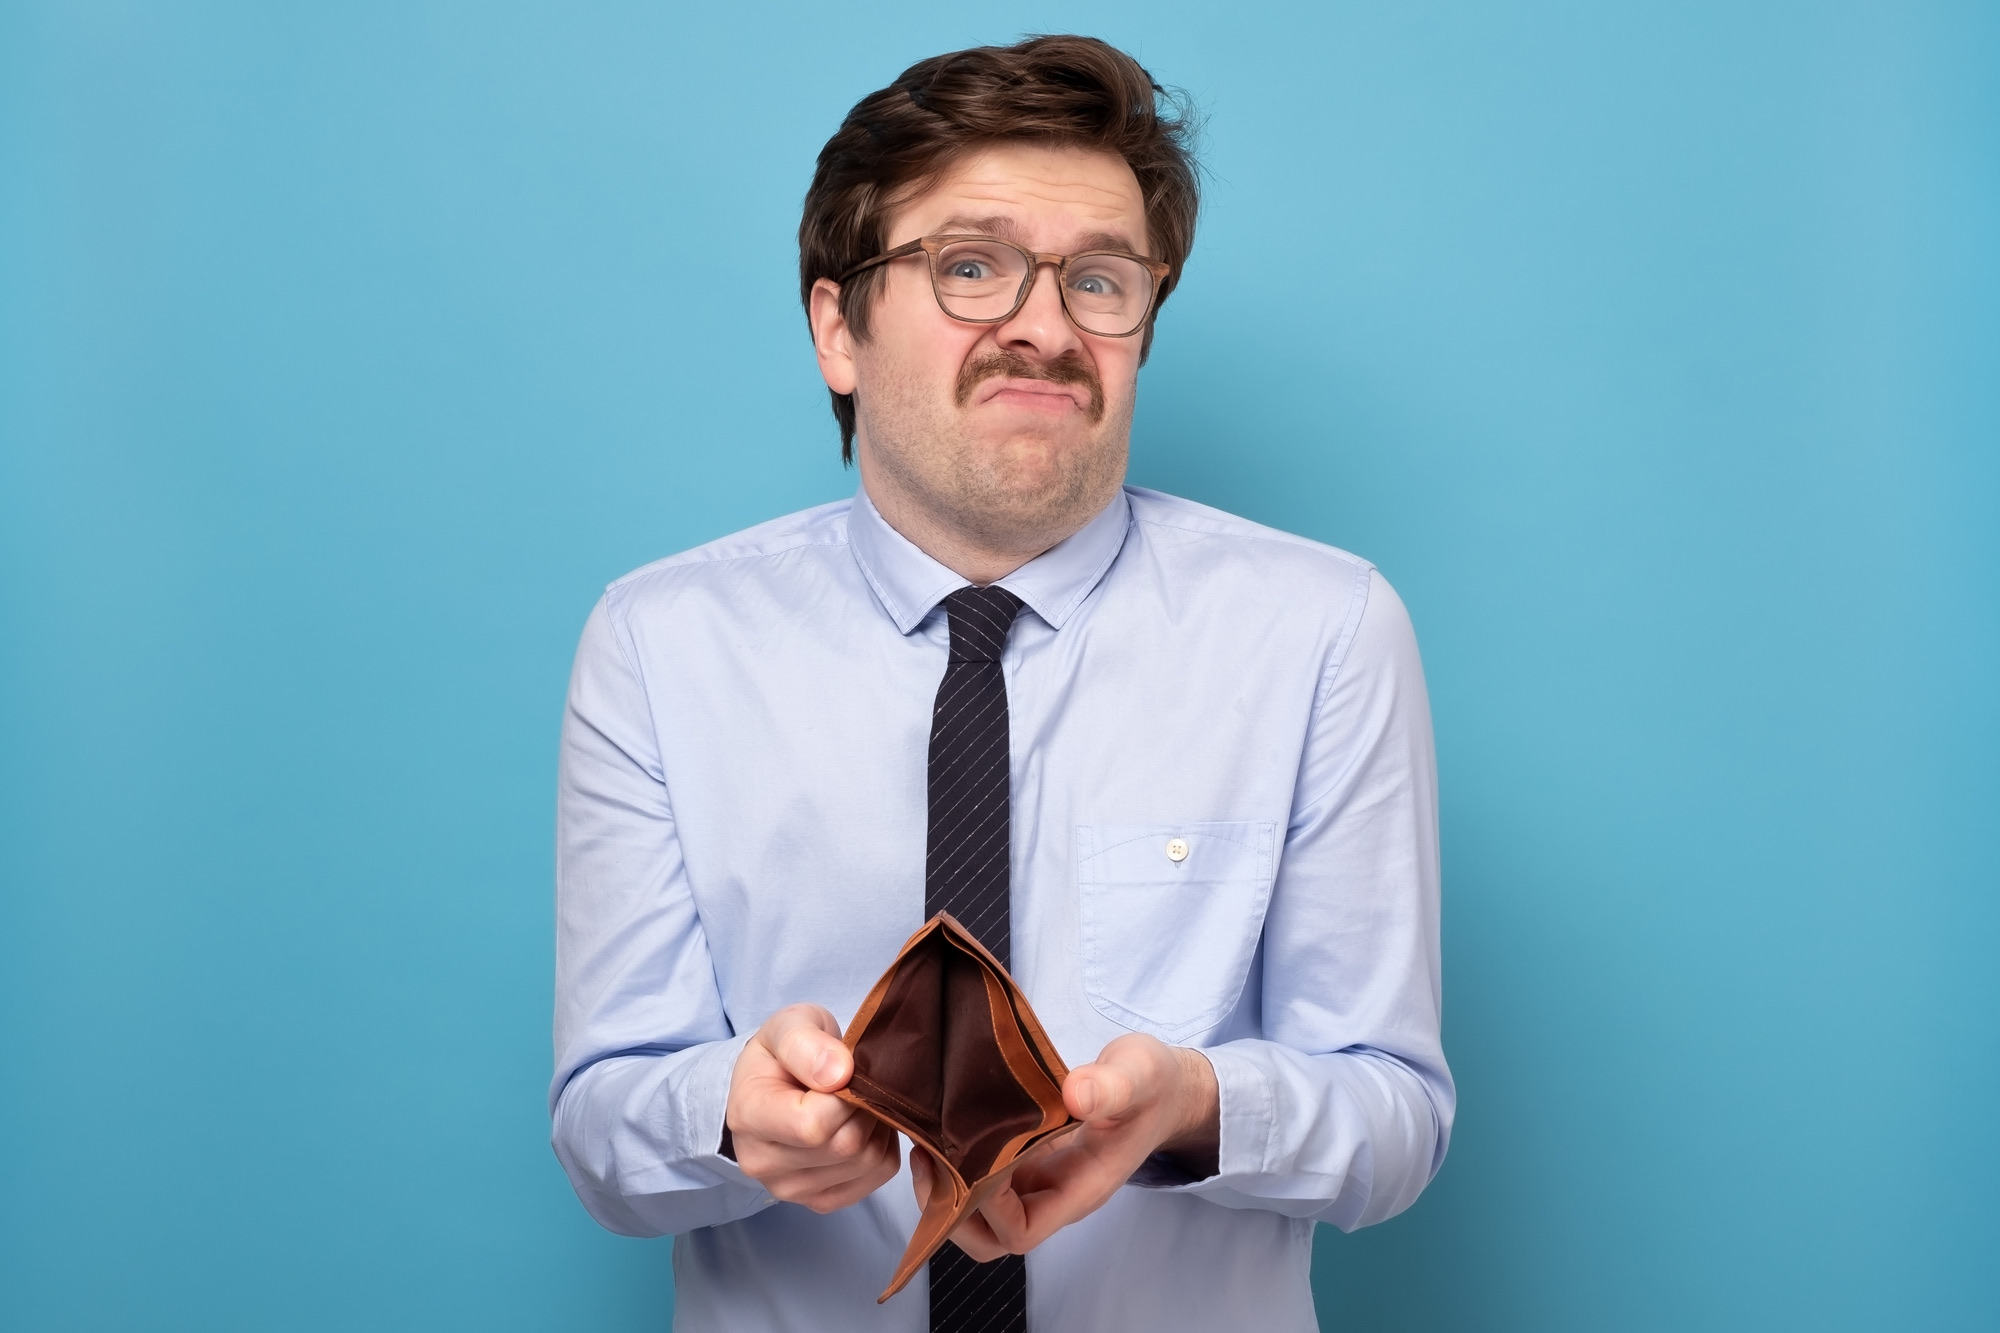 Sad businessman holding an empty wallet isolated on a blue background. Bankruptcy financial difficulties concept. Job loss.